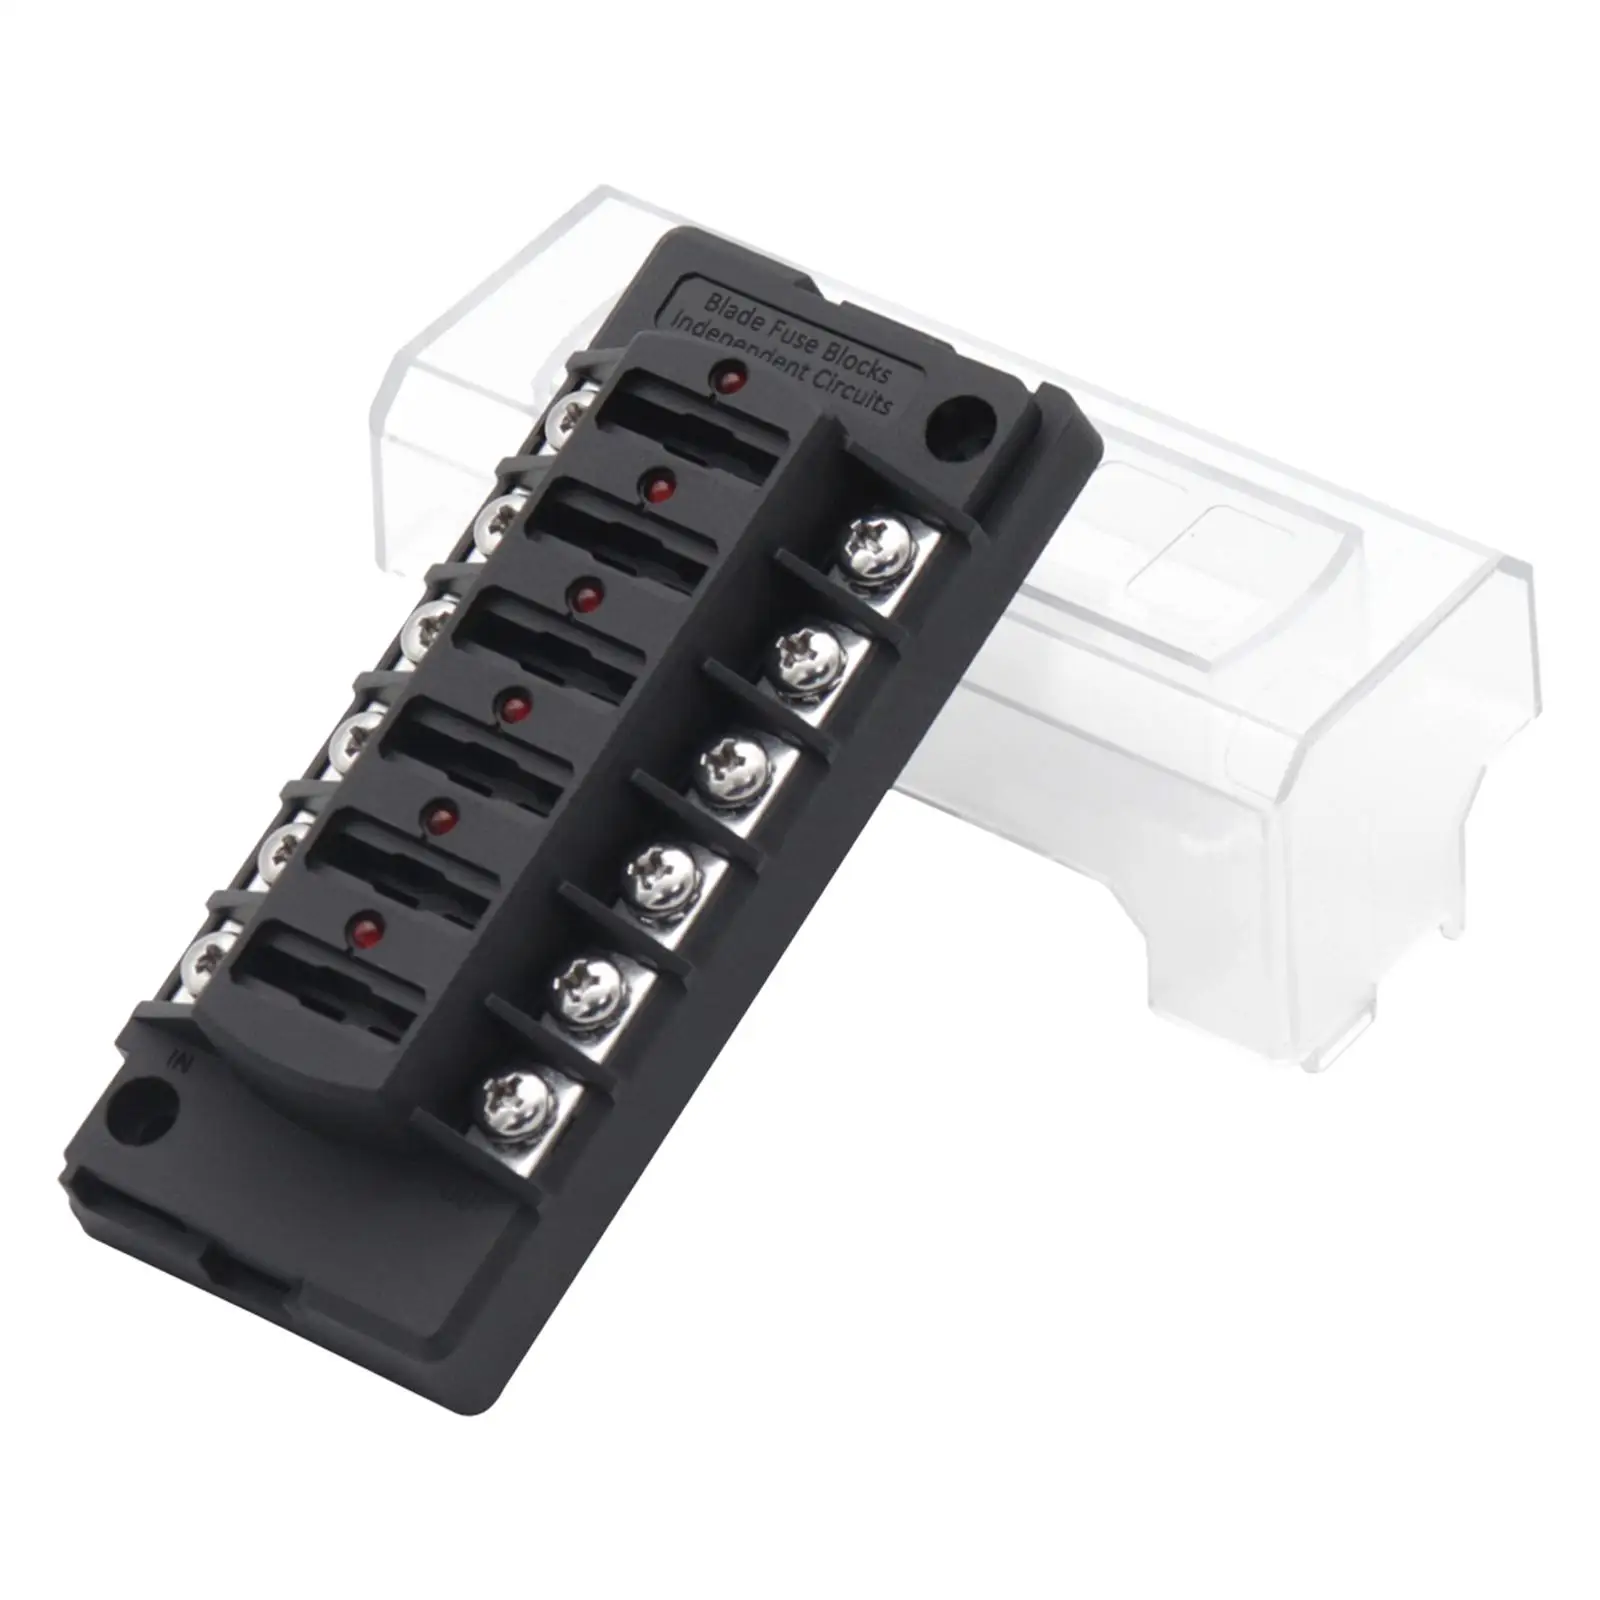   Fuse Block Box Damp Cover with LED Indicator Fit for Automotive